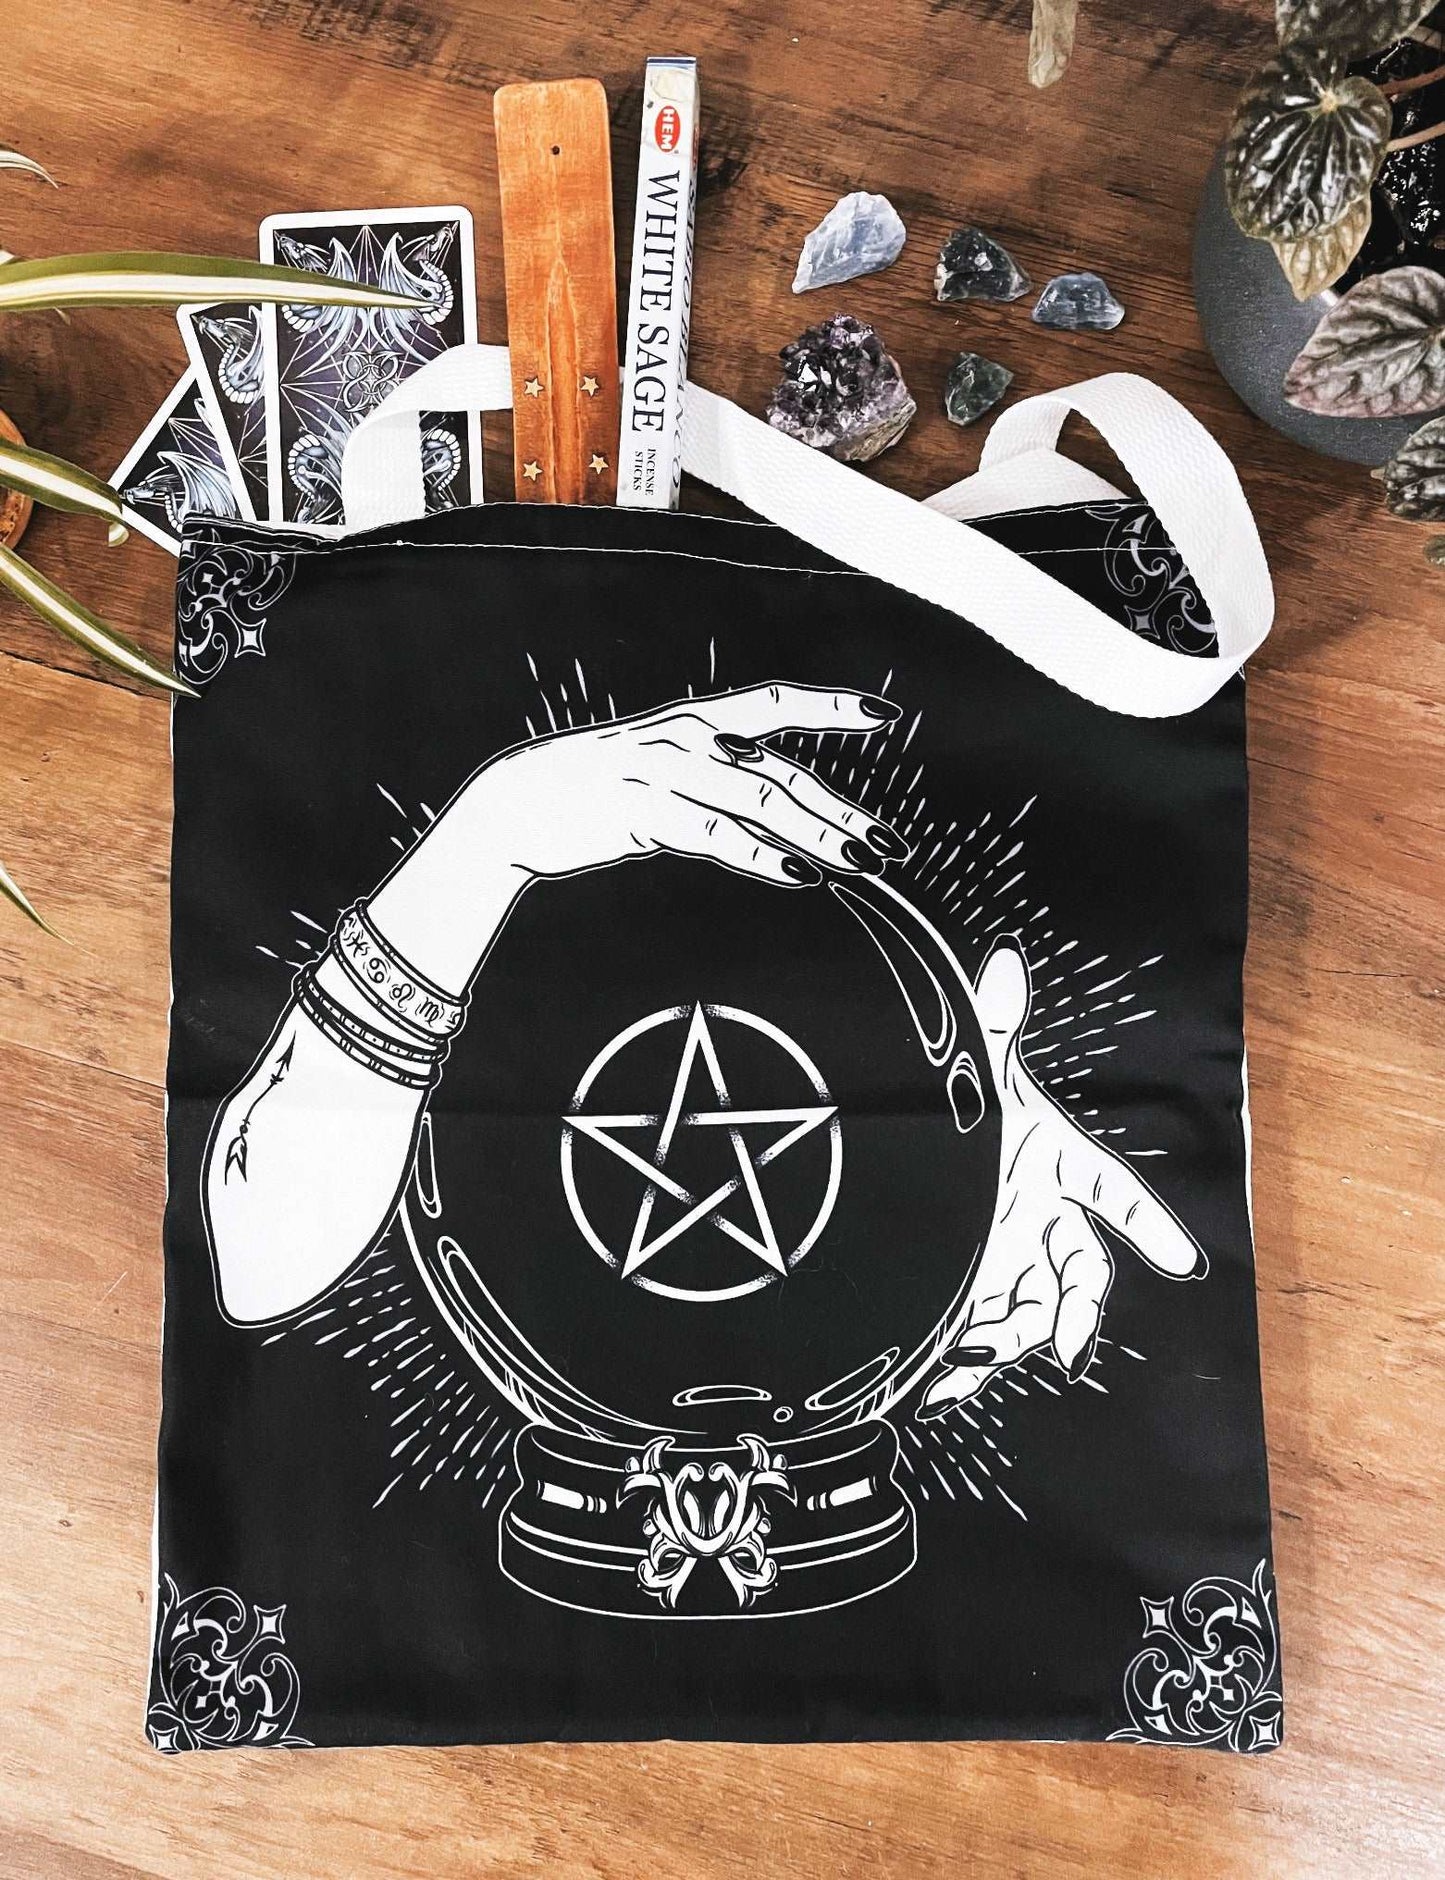 Pictured is a large canvas tote bag featuring an image of a black crystal ball with hands around it and a pentagram in the middle of the crystal ball.